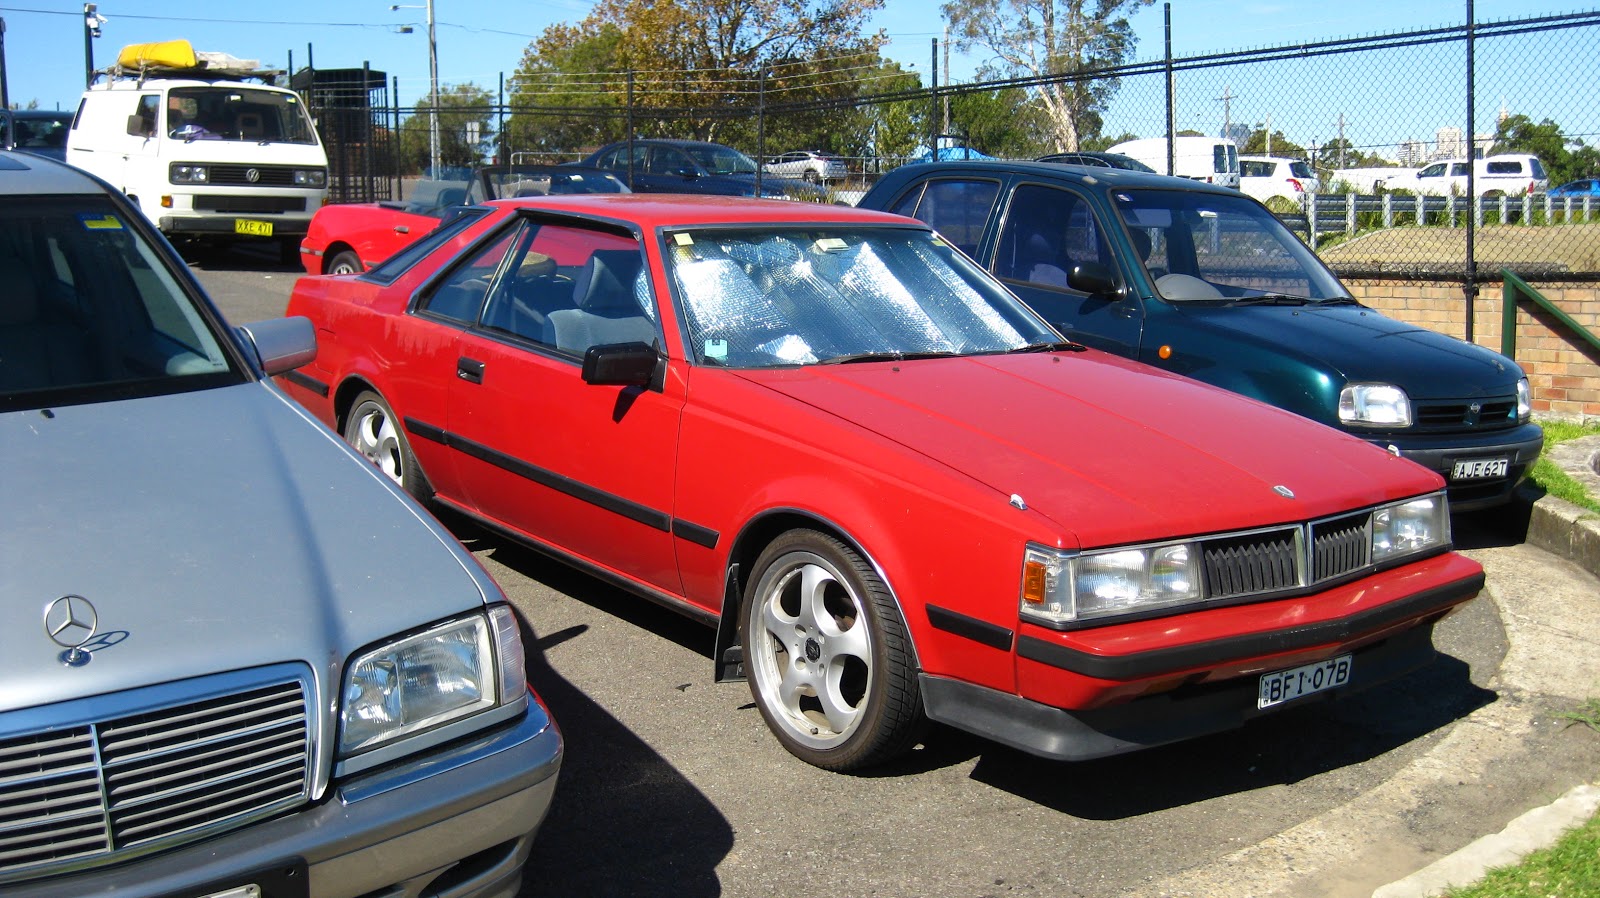 Aussie Old Parked Cars: 1983 Toyota Corona Hardtop Coupe (T140)